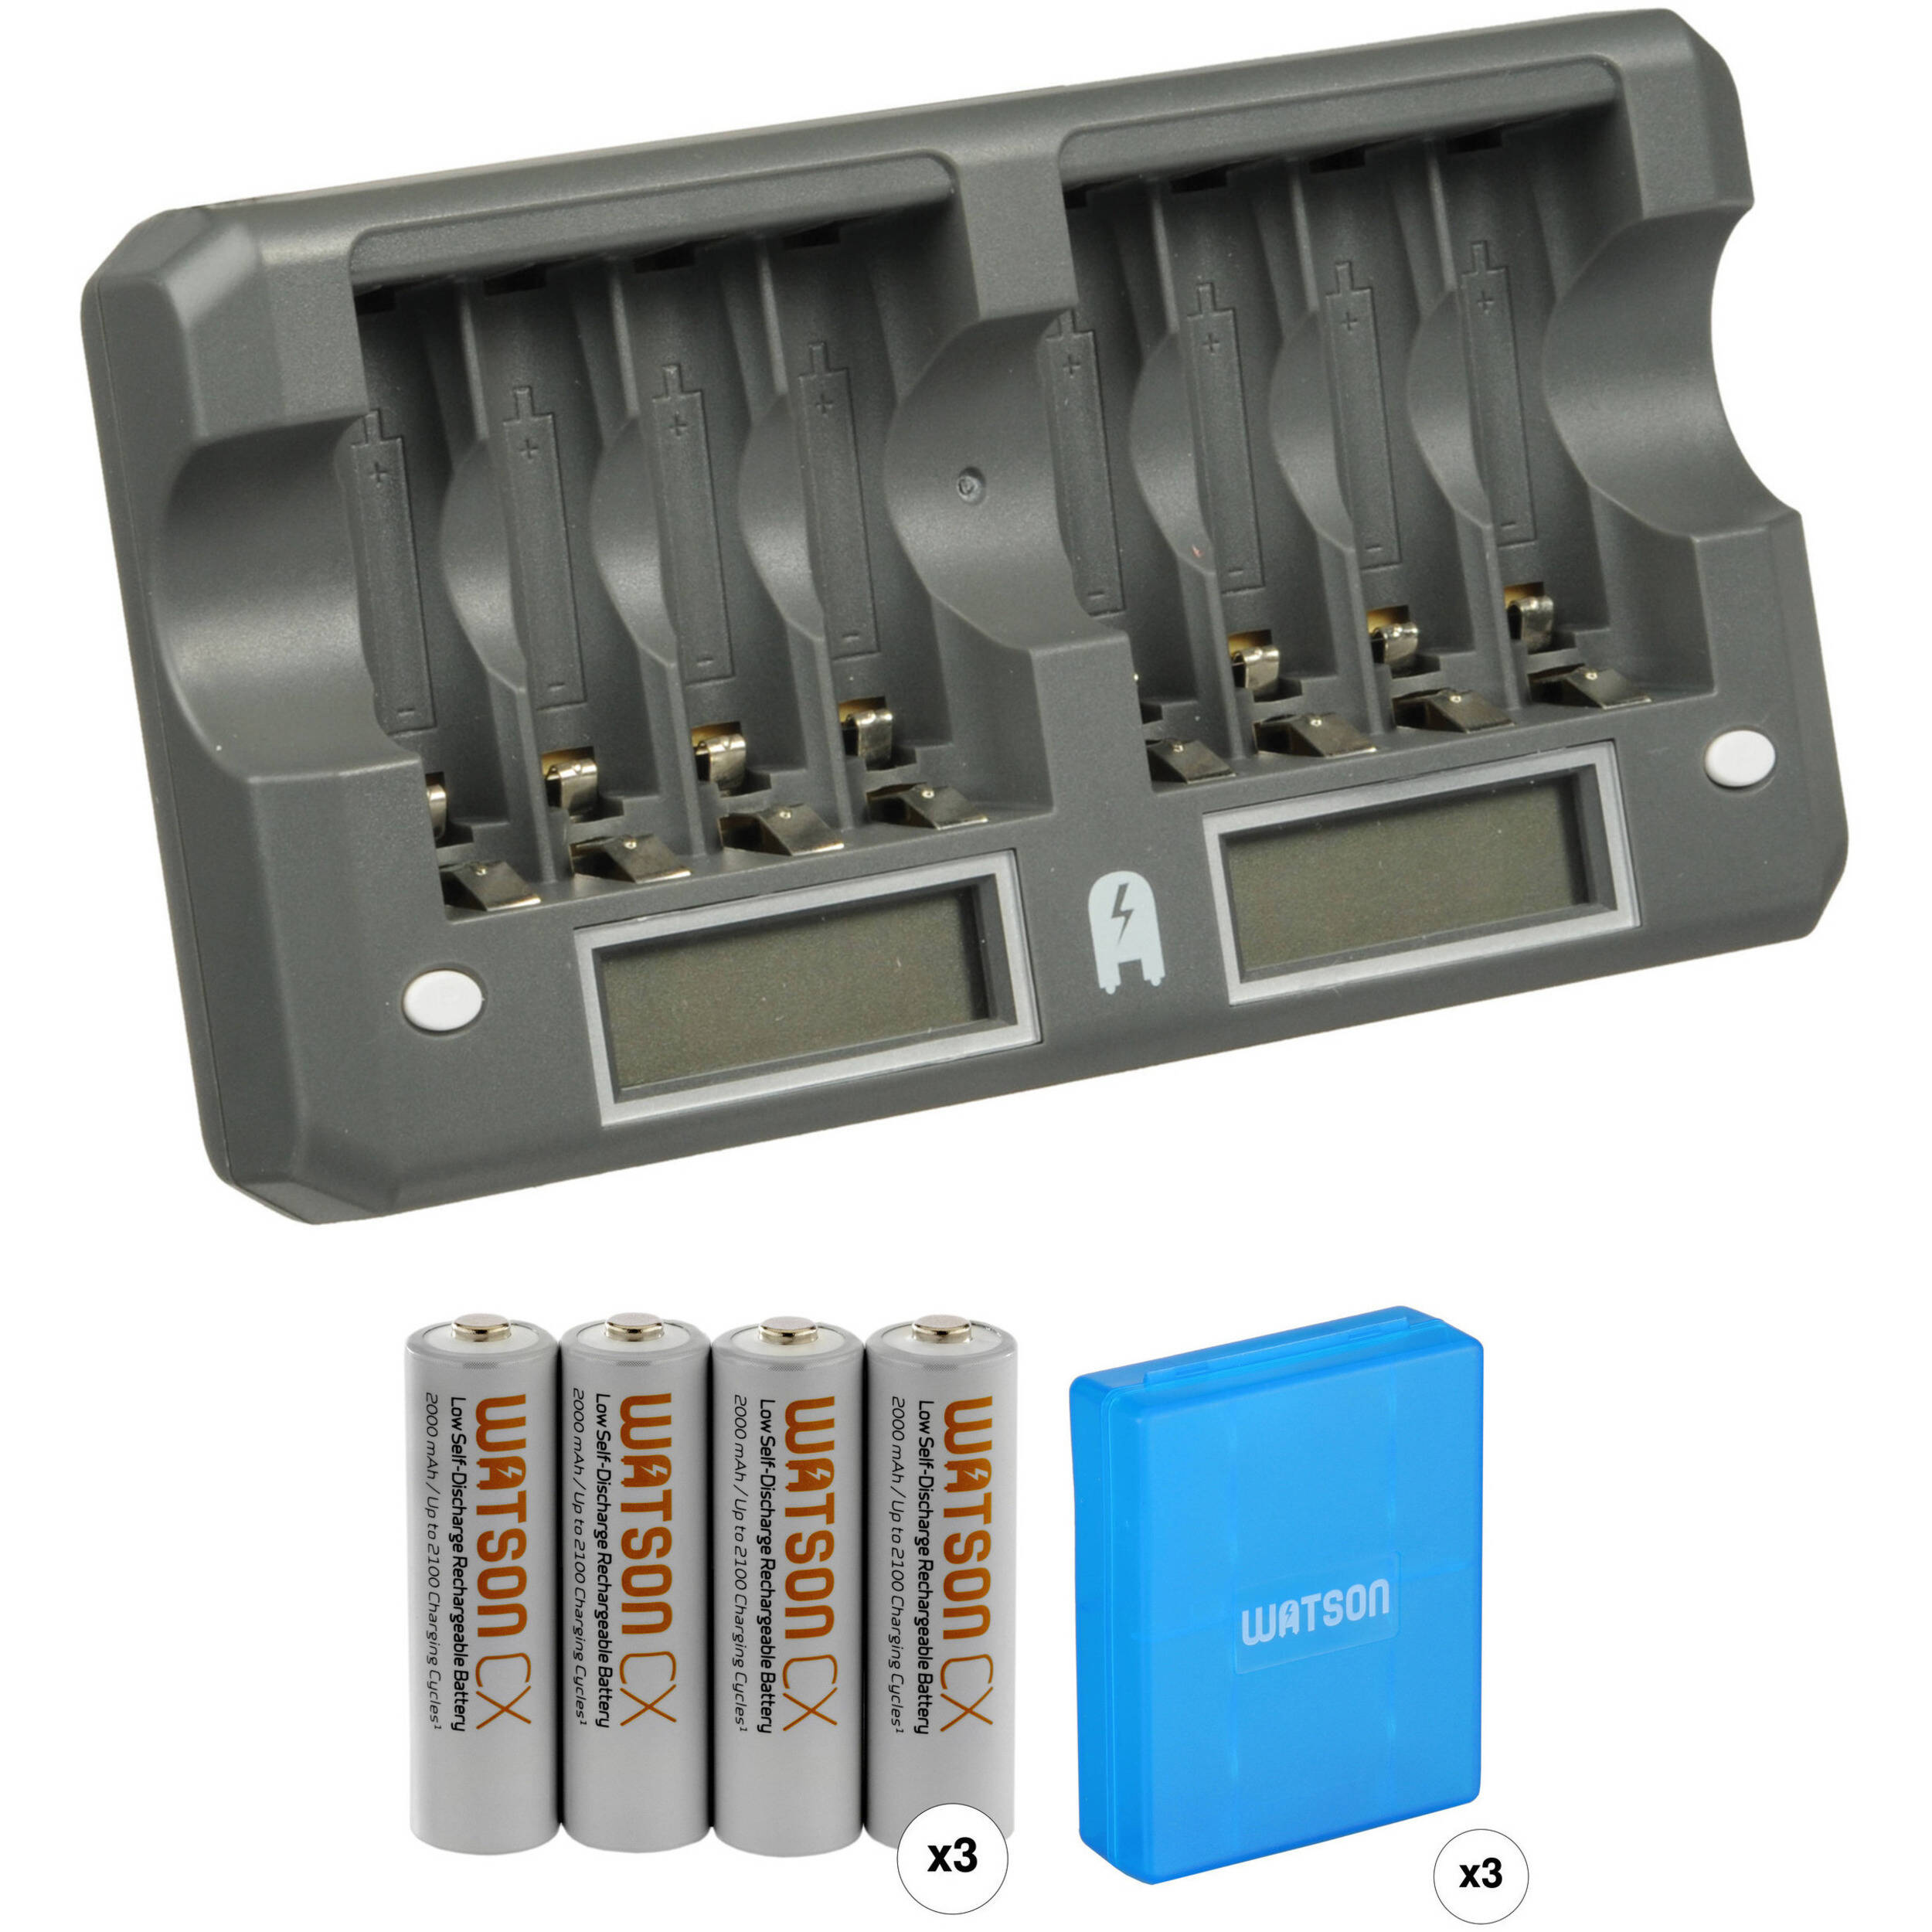 rechargeable batteries and charger